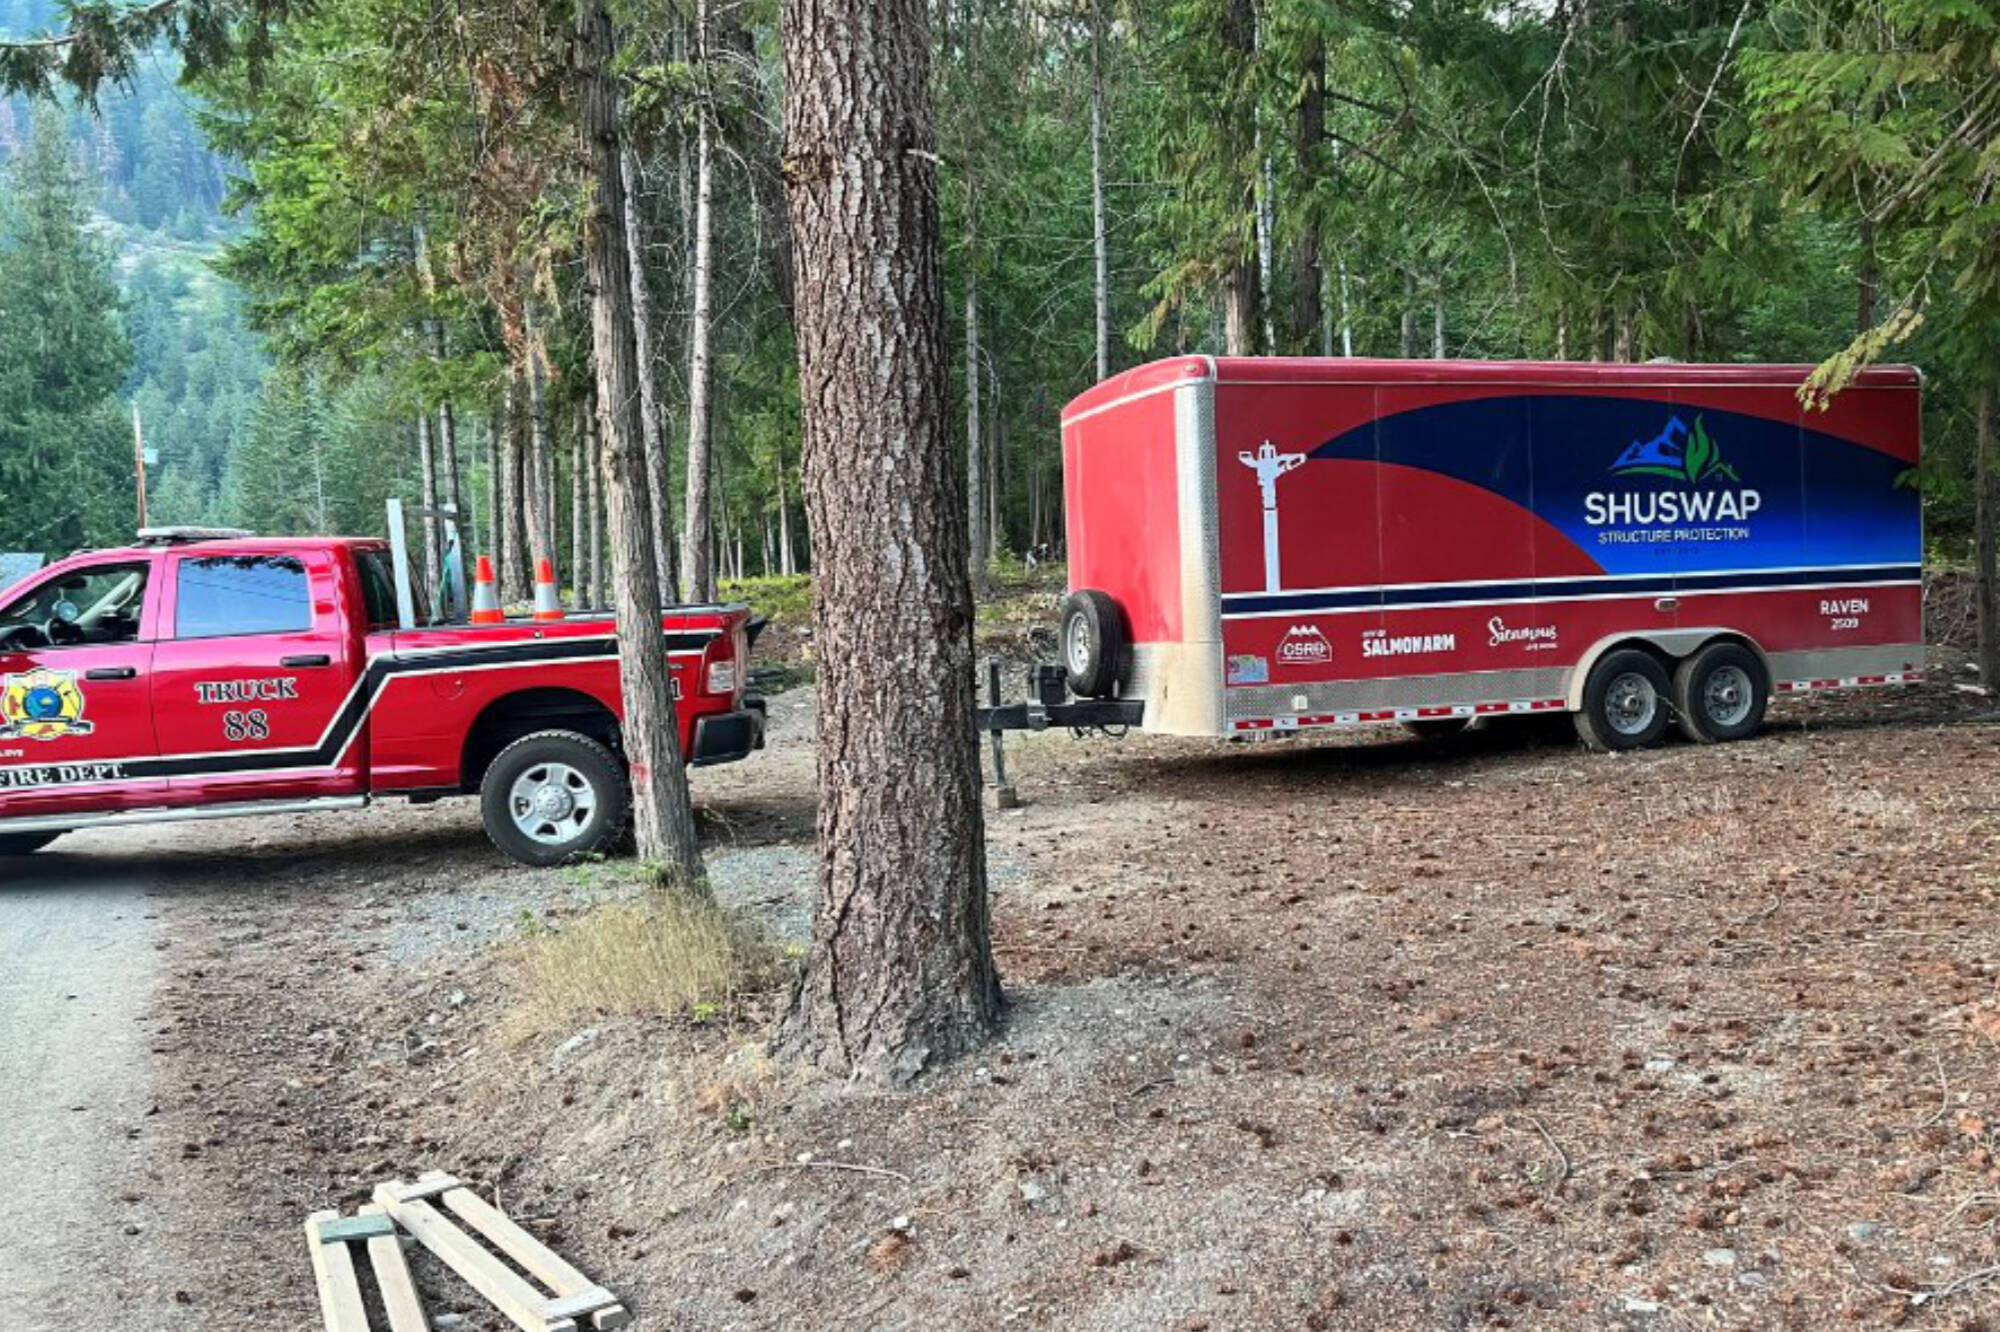 The Columbia Shuswap Regional District has deployed a Structure Protection Unit to properties under an evacuation alert that was issued on July 20 in response to the growing Lower East Adams wildfire. (CSRD image)